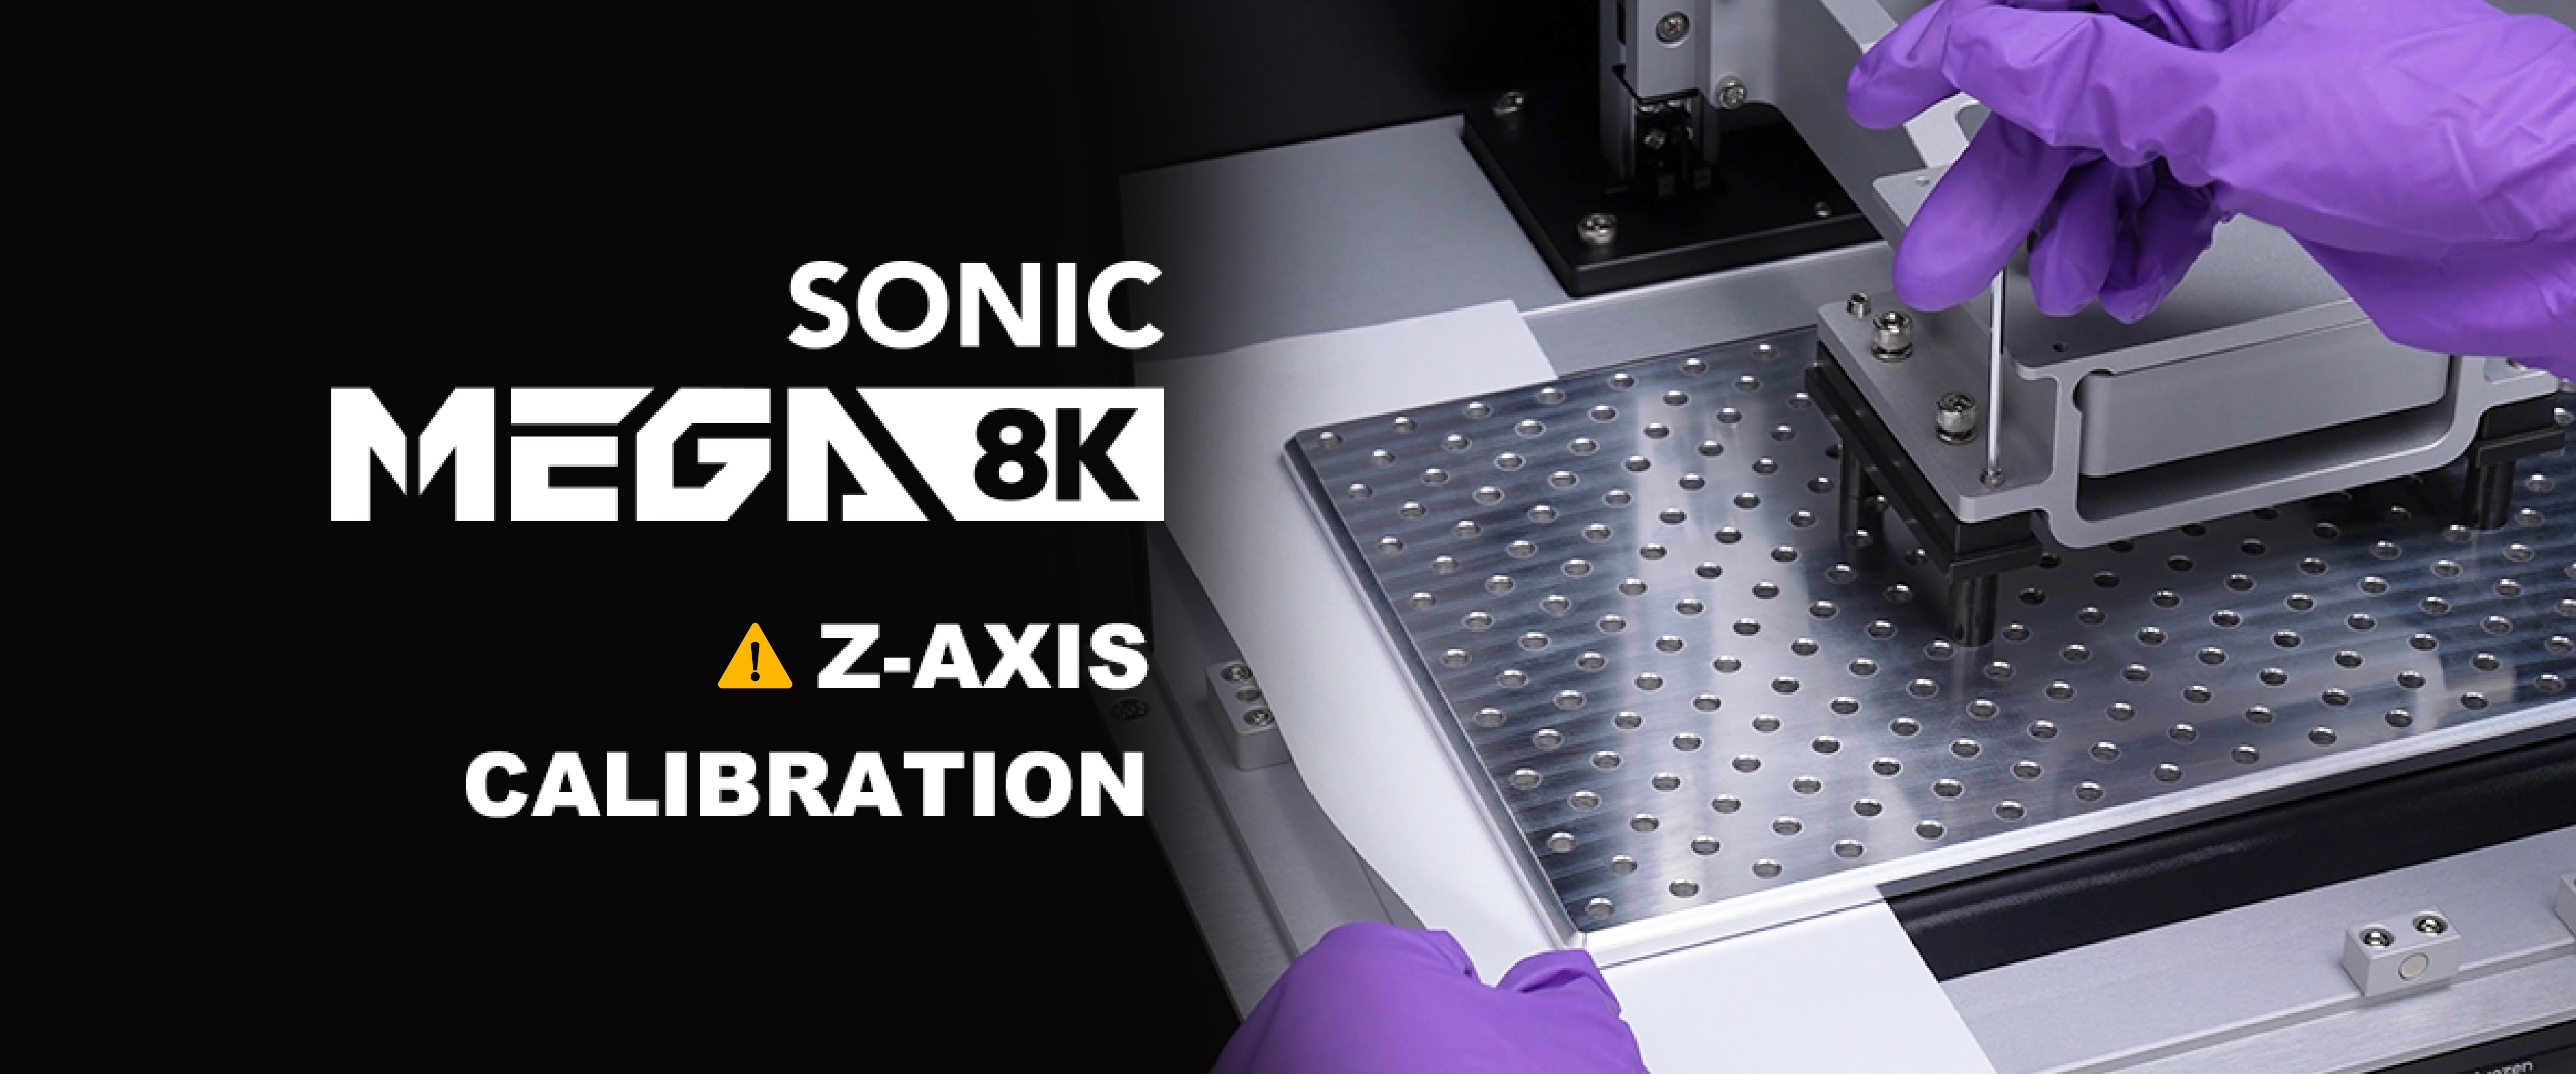 How to Perform Z-axis Calibration on the Sonic Mega 8K